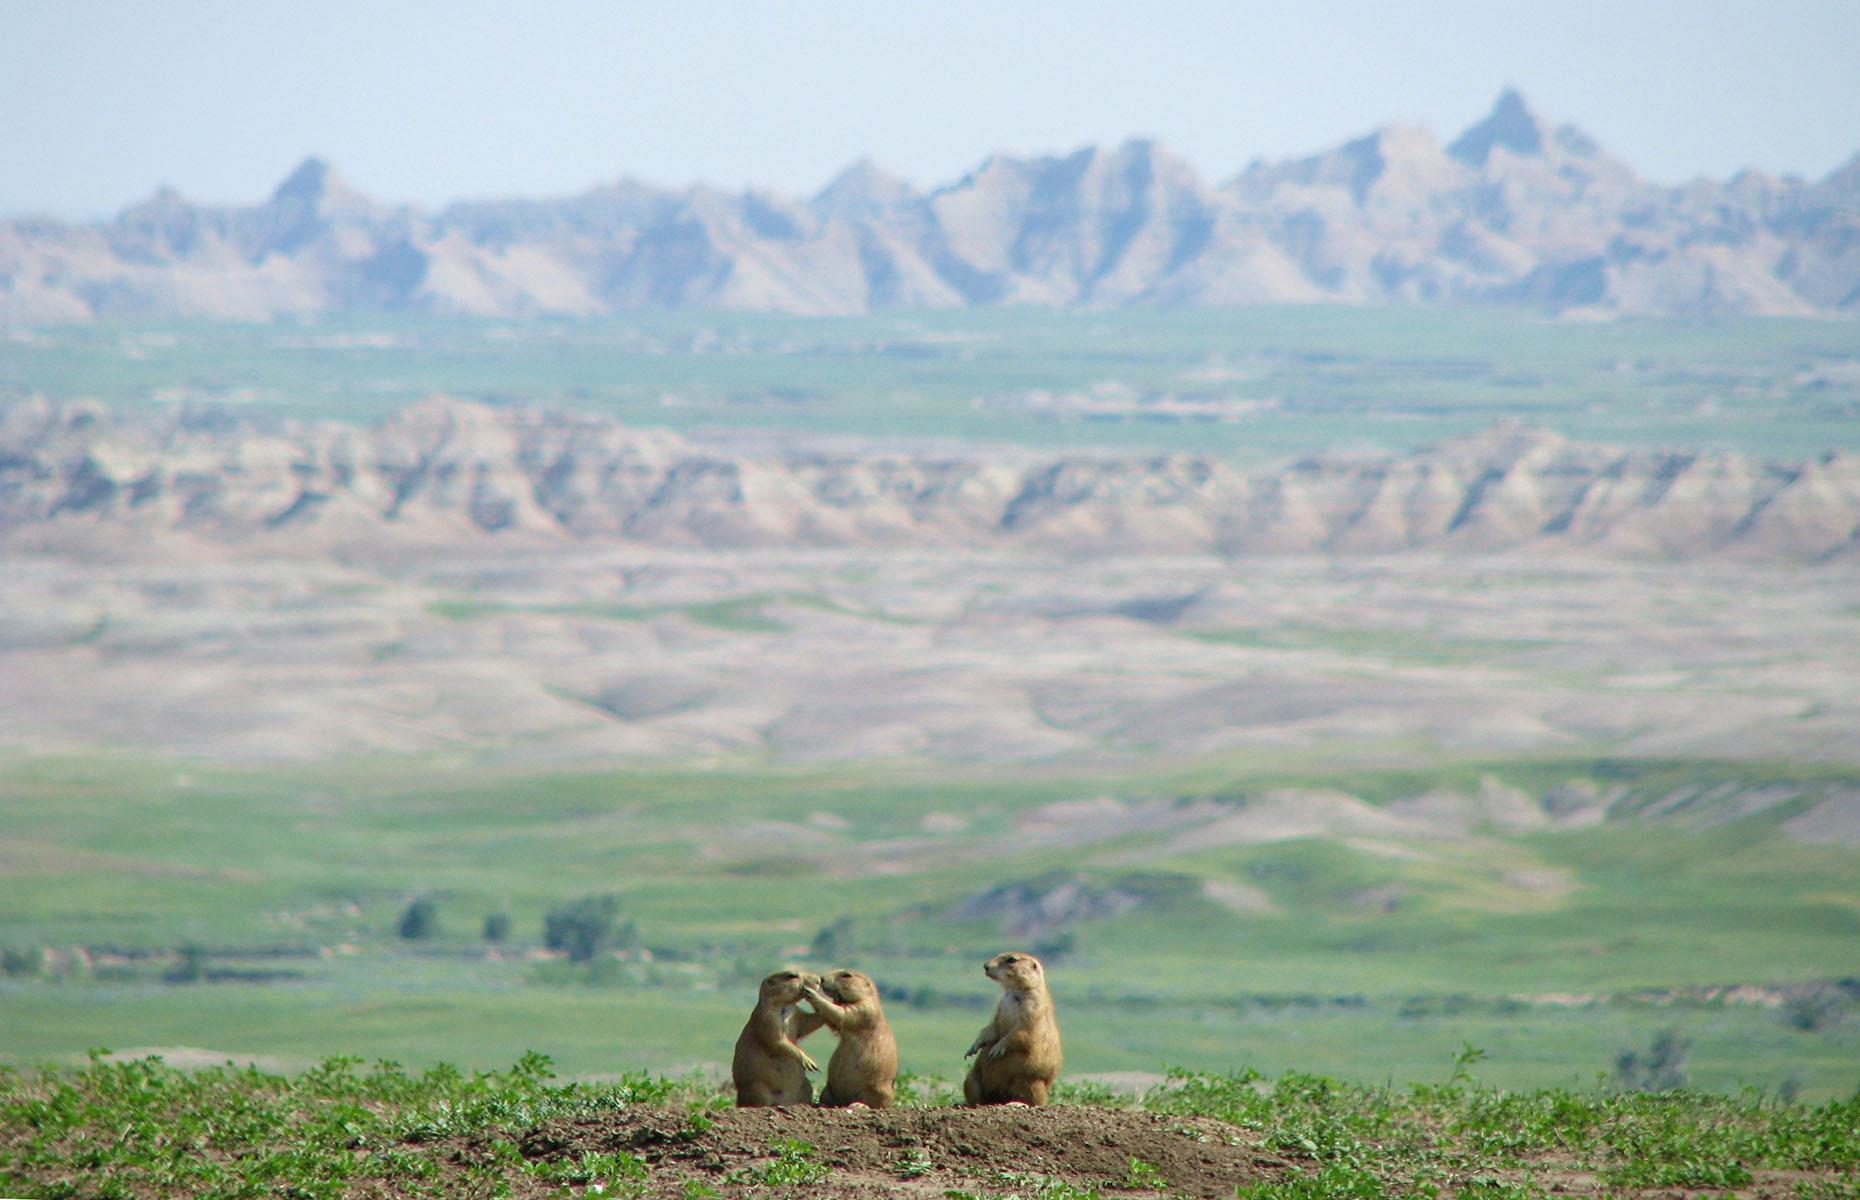 <p>It's home to a variety of native wildlife, including a large colony of prairie dogs. At <a href="https://www.badlandsranchstore.com/about%20us.htm">the Badlands Ranch Store</a> you can buy peanuts and feed the furry rodents, but to see them in a wilder and more natural setting, take a five-mile (8km) detour down the bumpy track from Sage Creek Rim Road to Prairie Dog Town.</p>  <p>Sit back and watch as hundreds as the champion diggers scurry about in the grasslands, popping in and out of their maze of holes.</p>